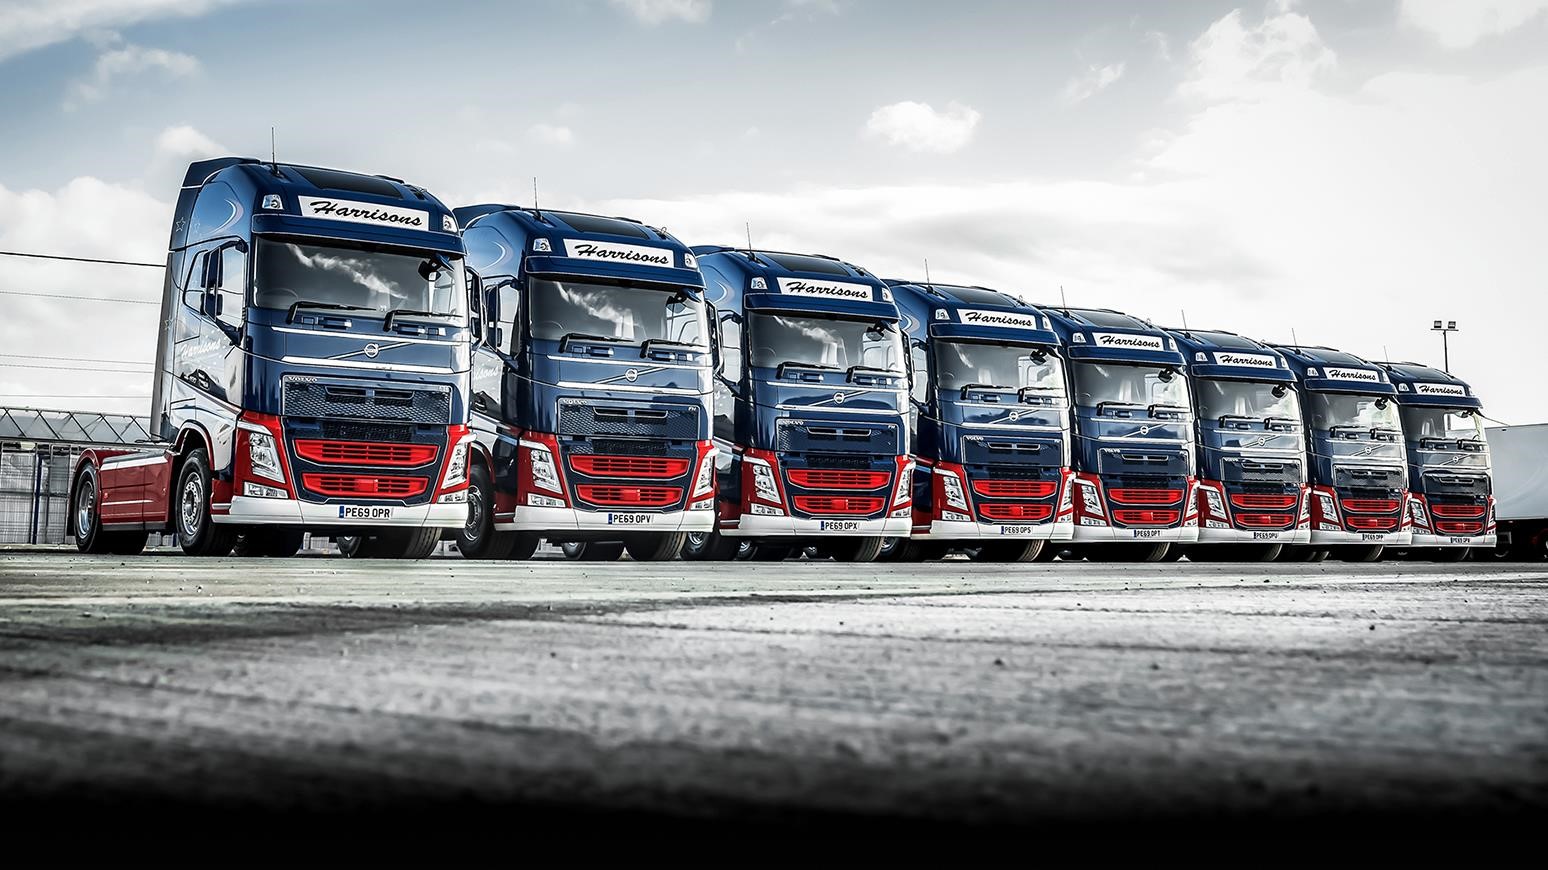 Harrisons Transport Adds 8 New Volvo FH Trucks For Temperature-Controlled Transport Operations